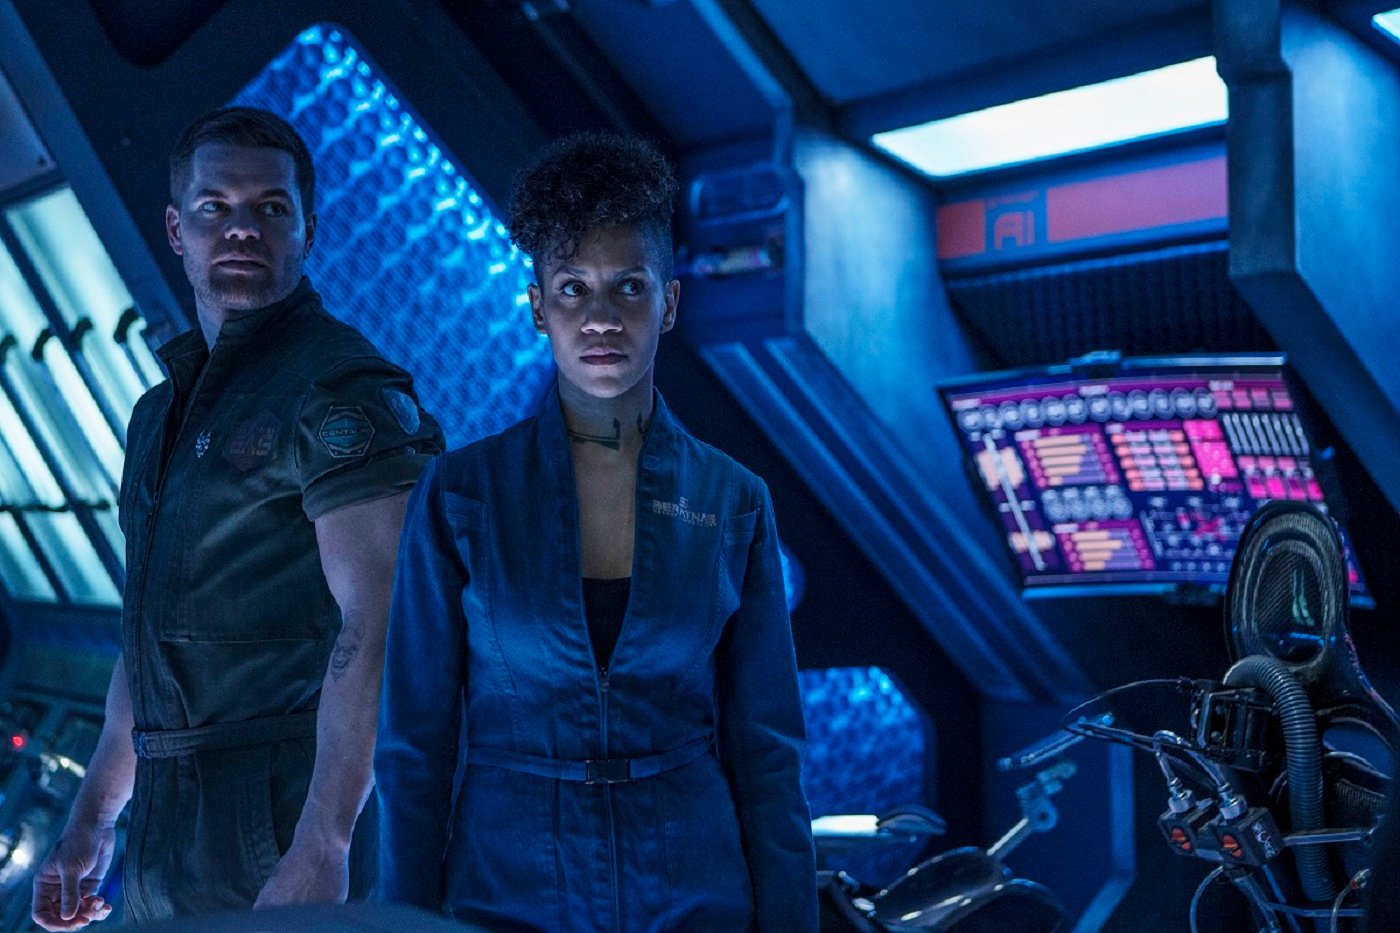 ‘The Expanse’ Season 6: What Is the Slow Zone?